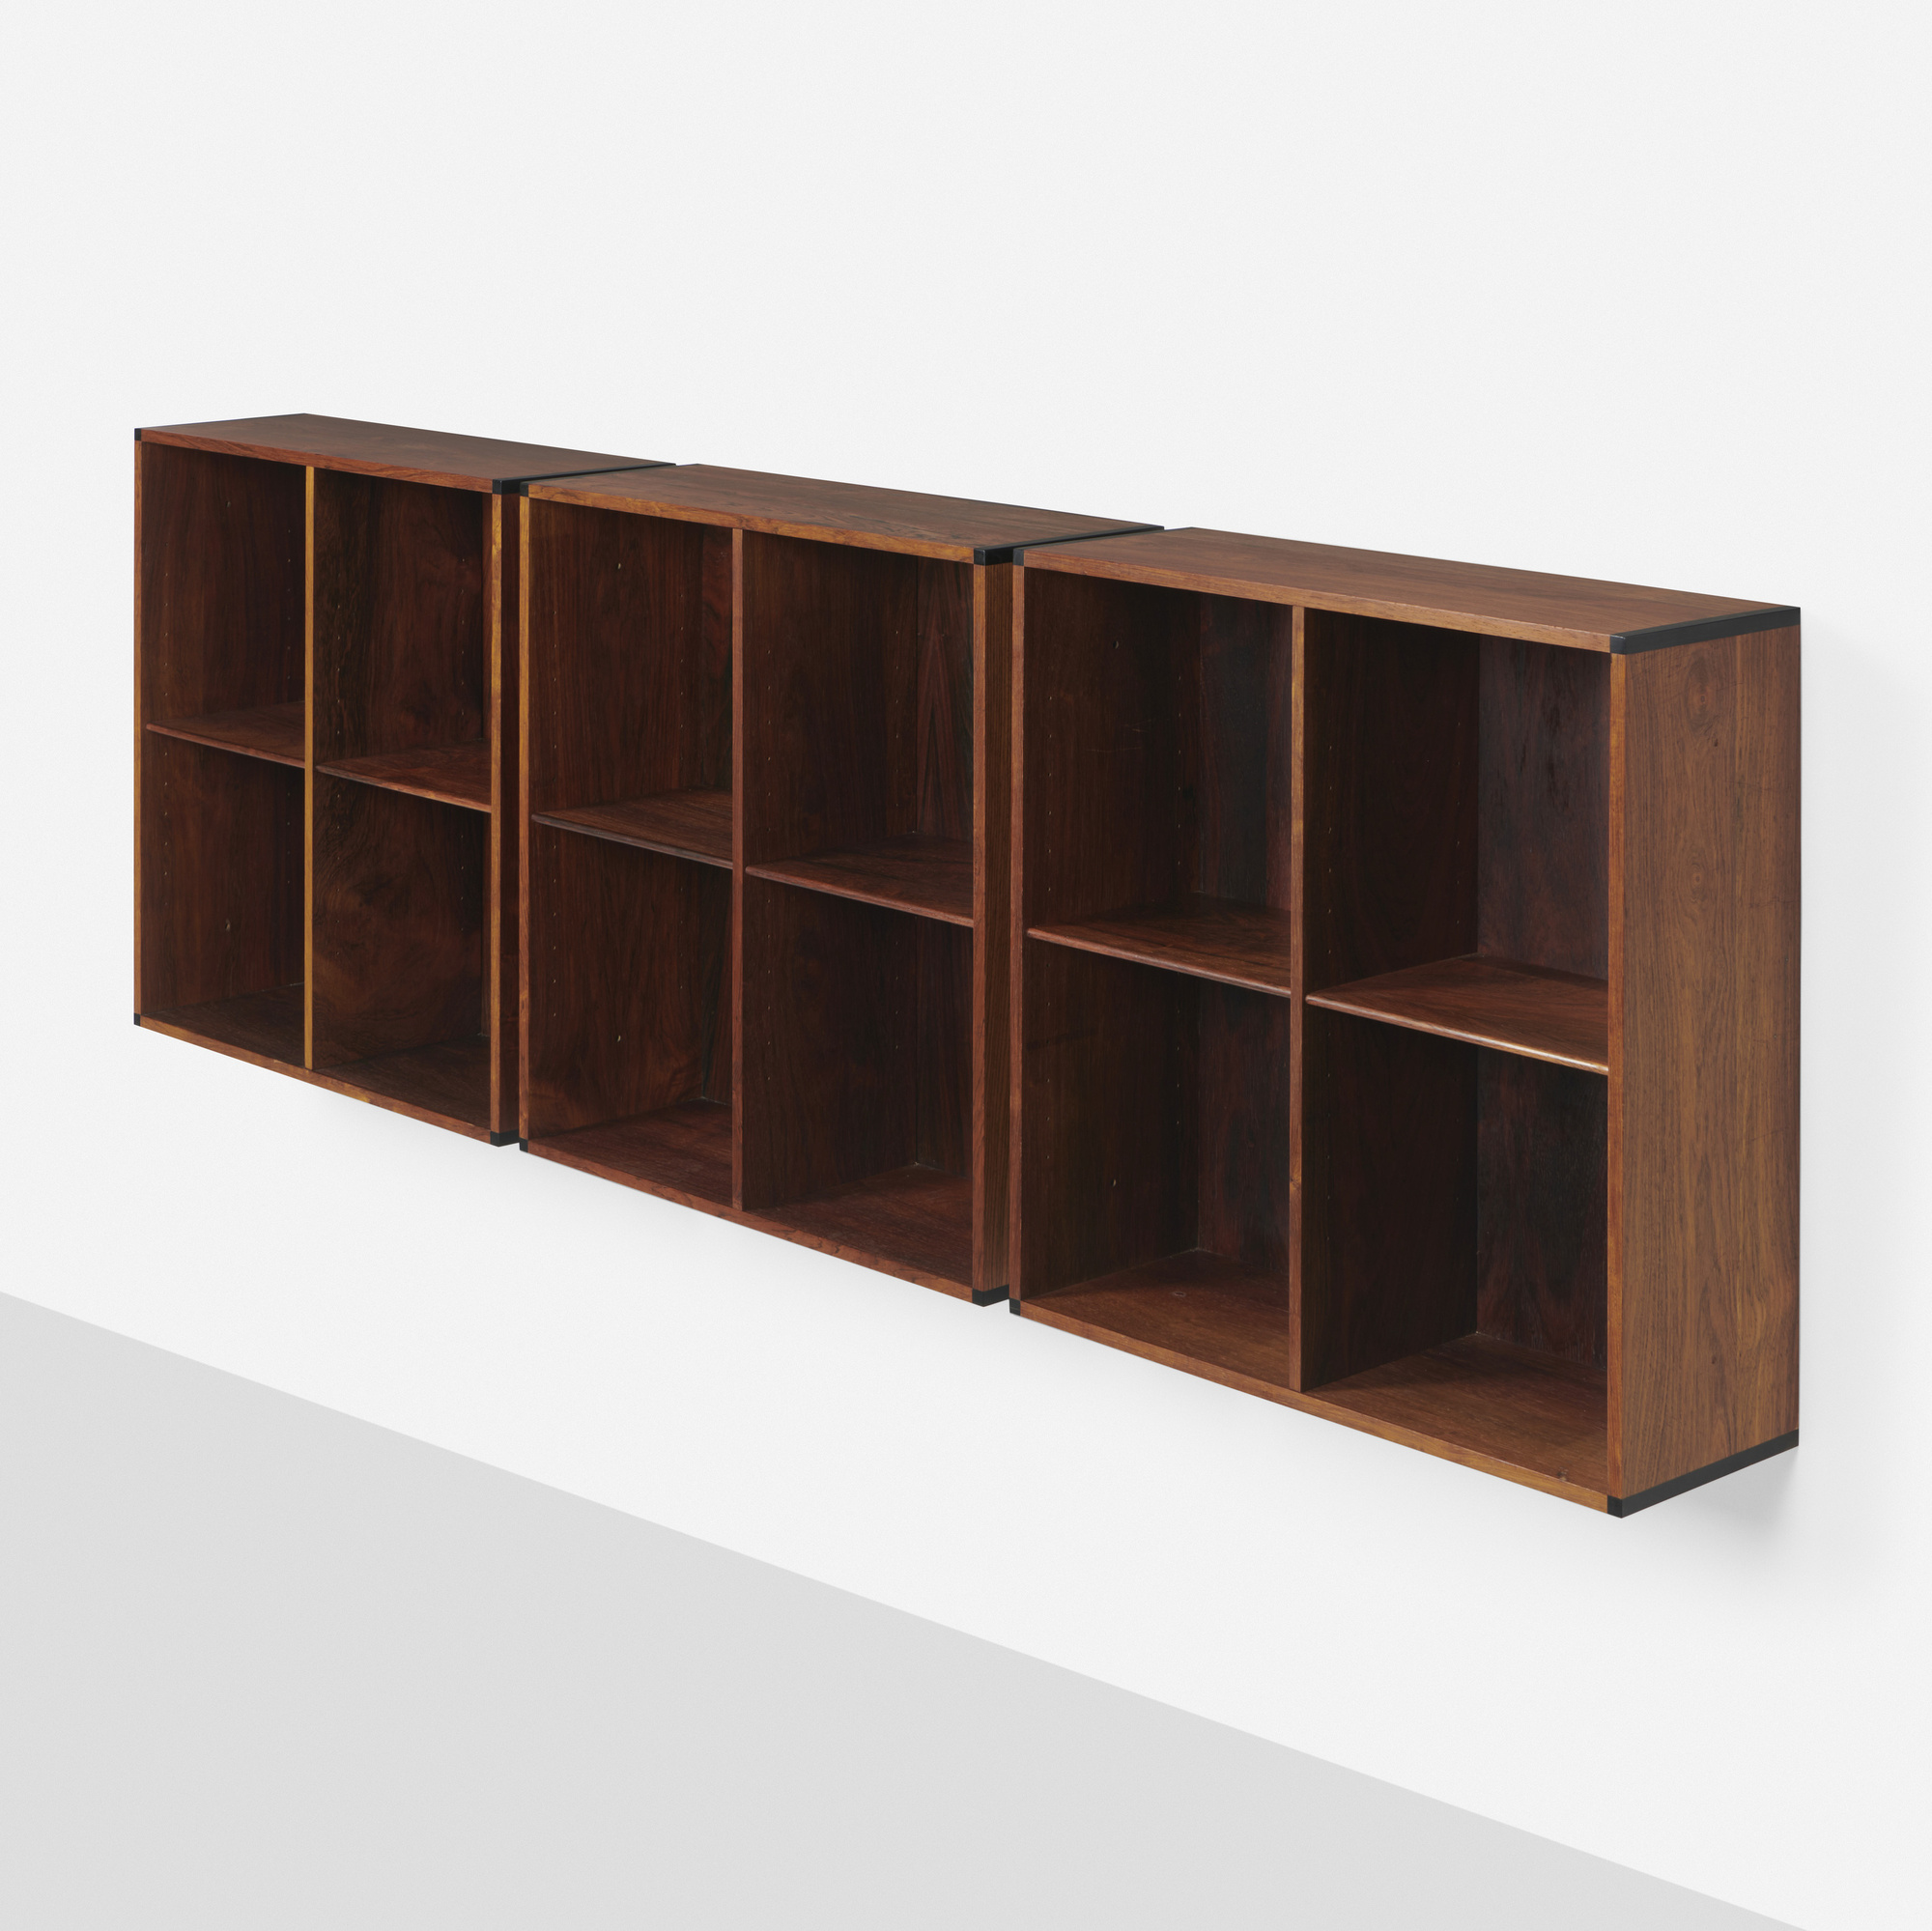 216 1 Scandinavian Design April 2023 Aksel Kjersgaard Wall Mounted Bookcases Set Of Three  Wright Auction ?t=1685119358